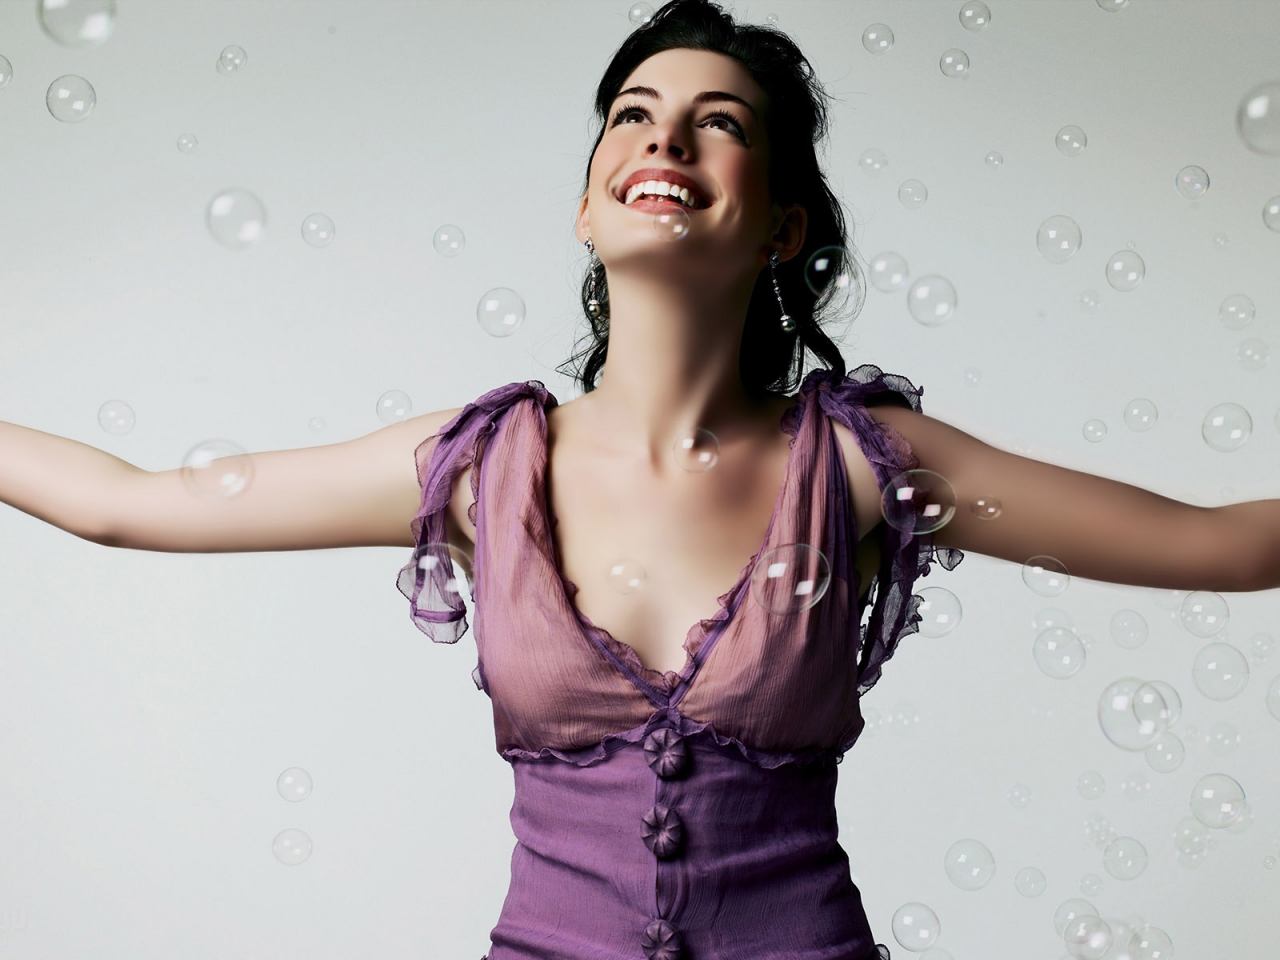 Anne Hathaway Bubbles for 1280 x 960 resolution